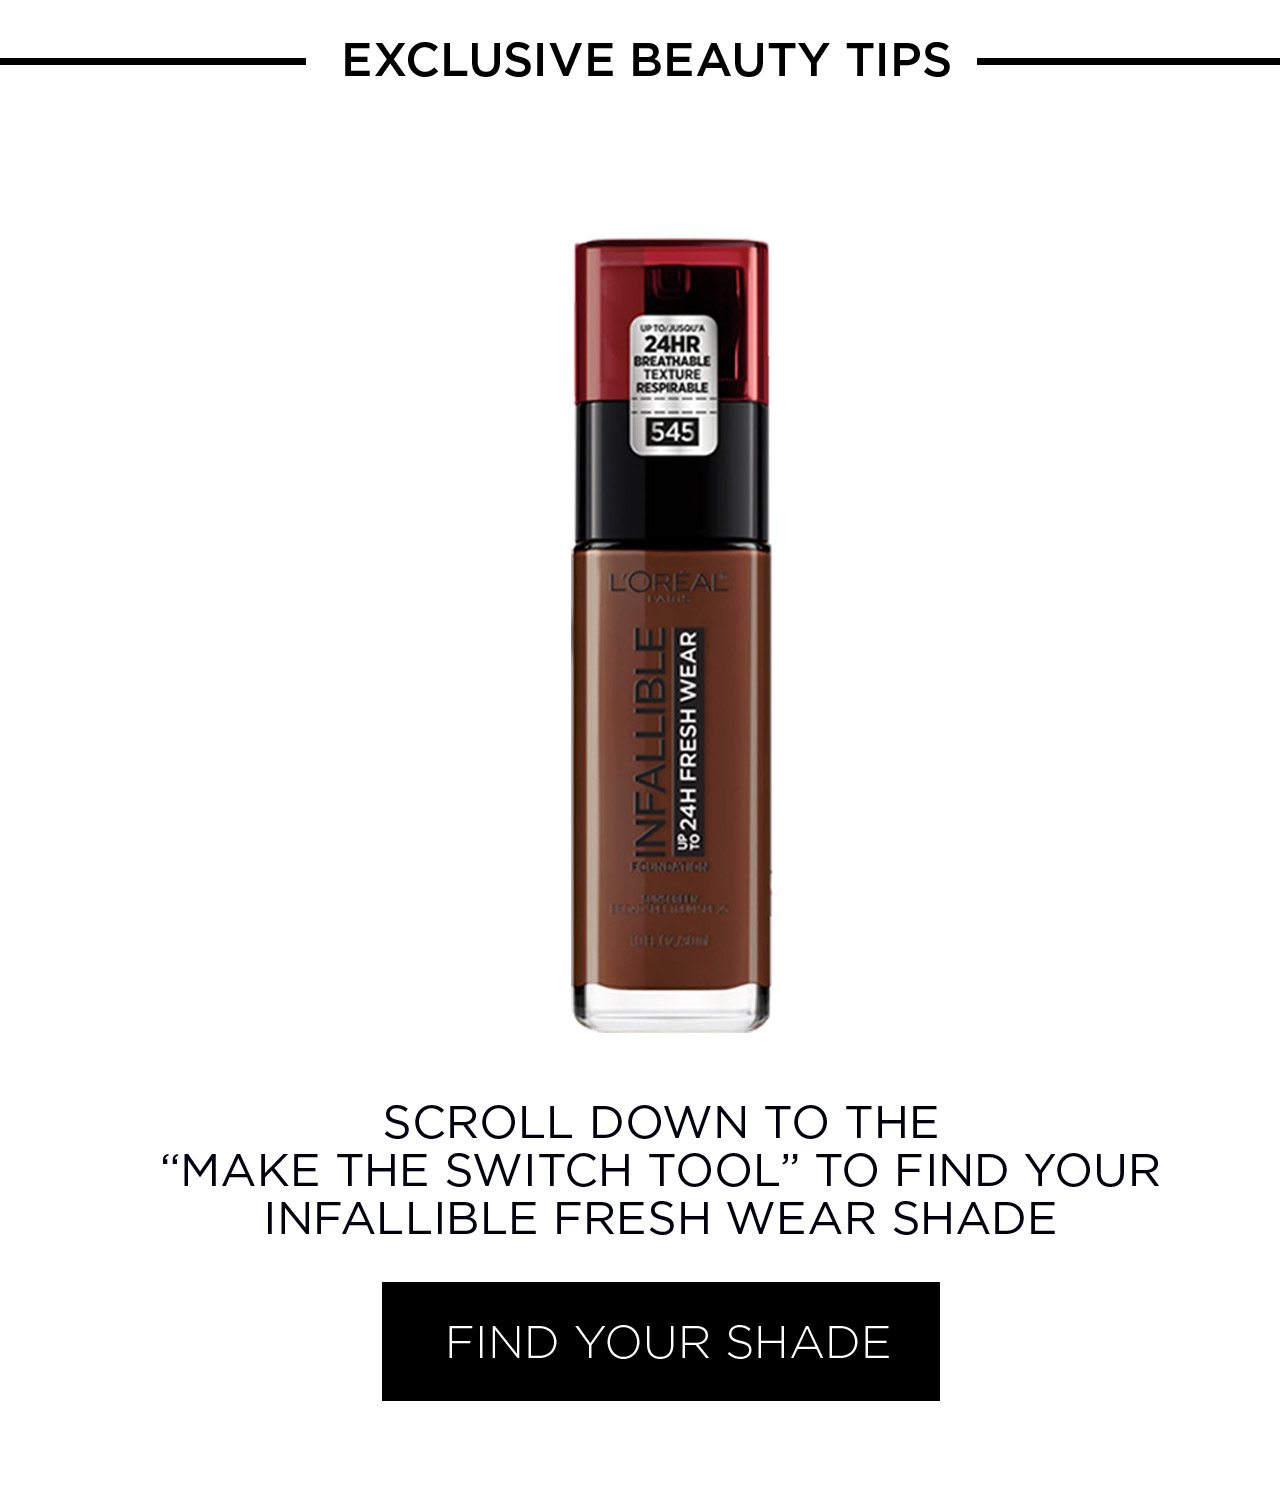 EXCLUSIVE BEAUTY TIPS - SCROLL DOWN TO THE “MAKE THE SWITCH TOOL” TO FIND YOUR INFALLIBLE FRESH WEAR SHADE - FIND YOUR SHADE